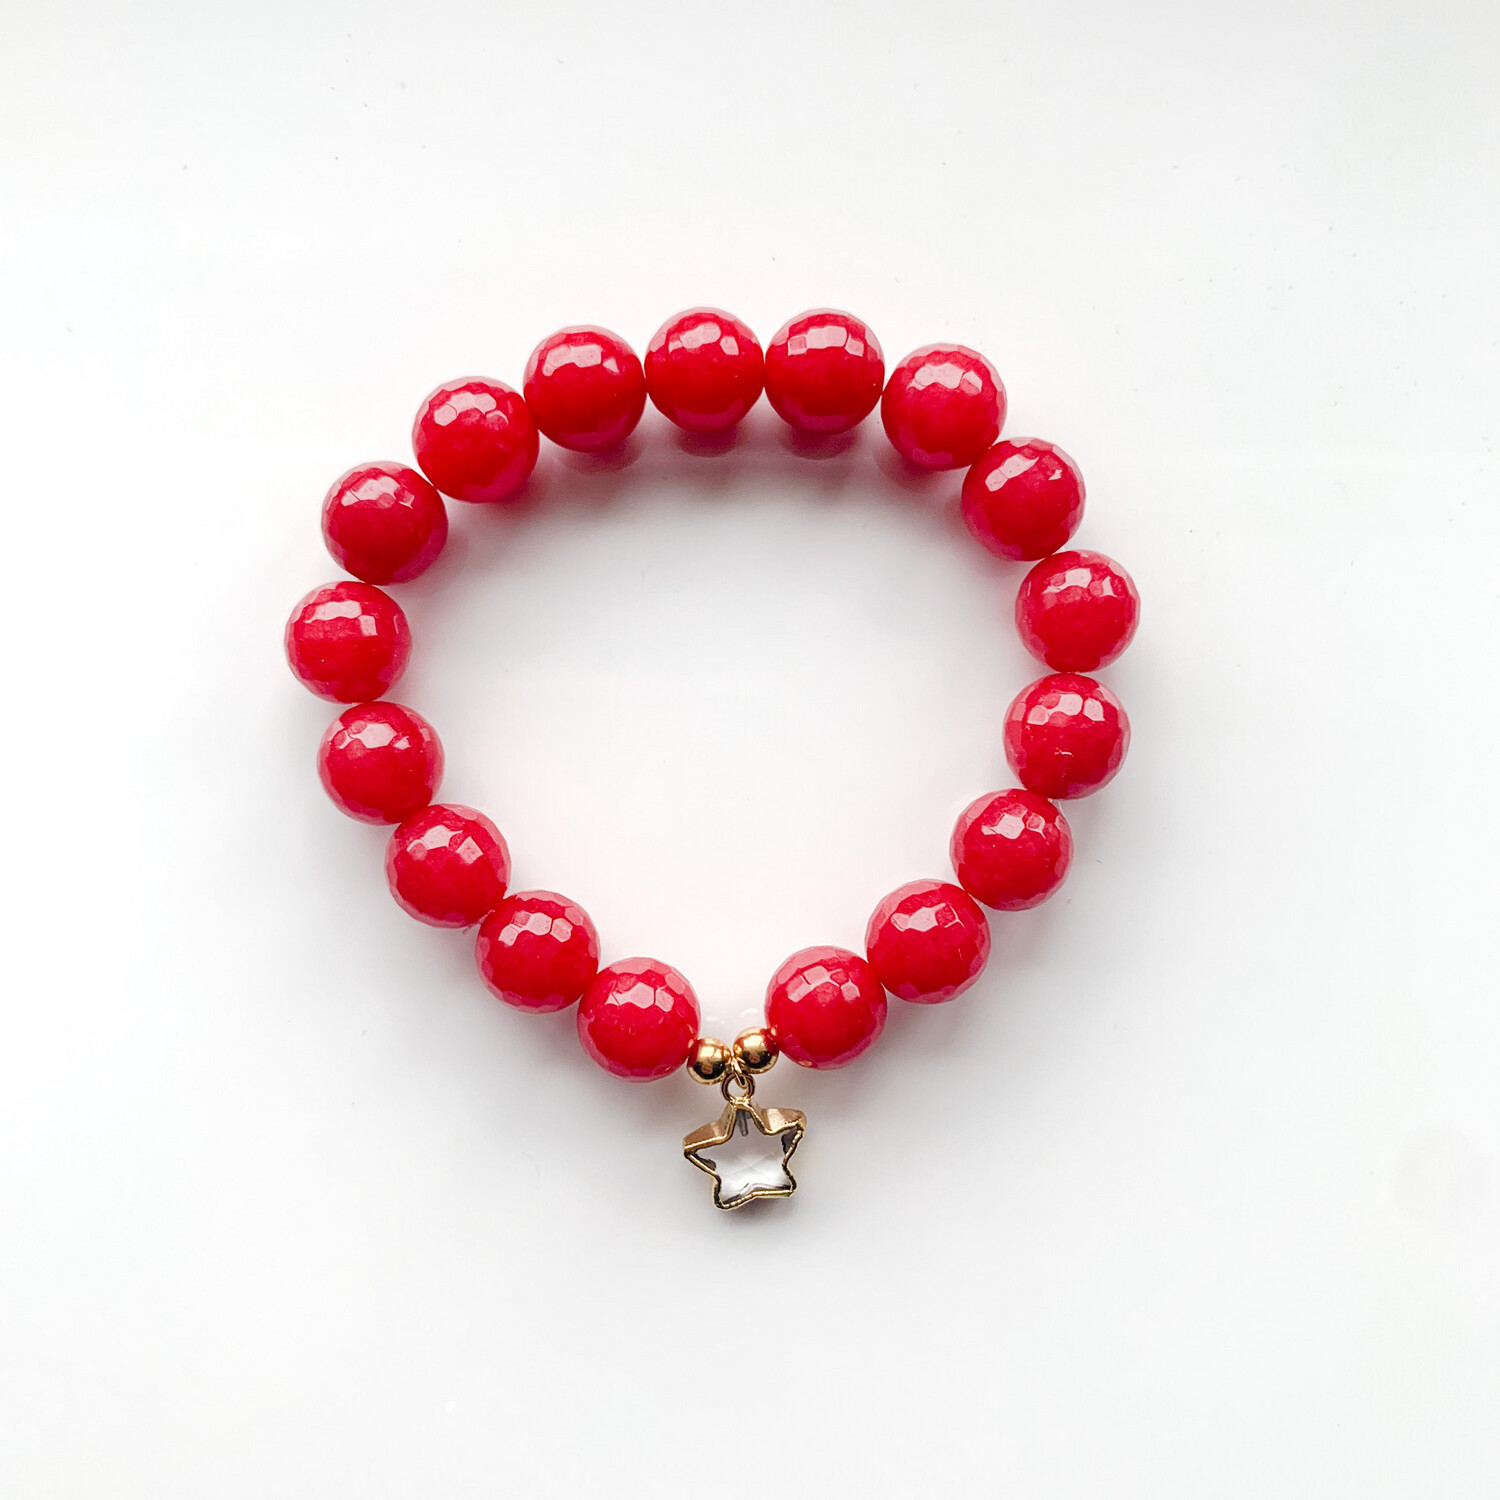 Charity Bracelet in Cherry Red